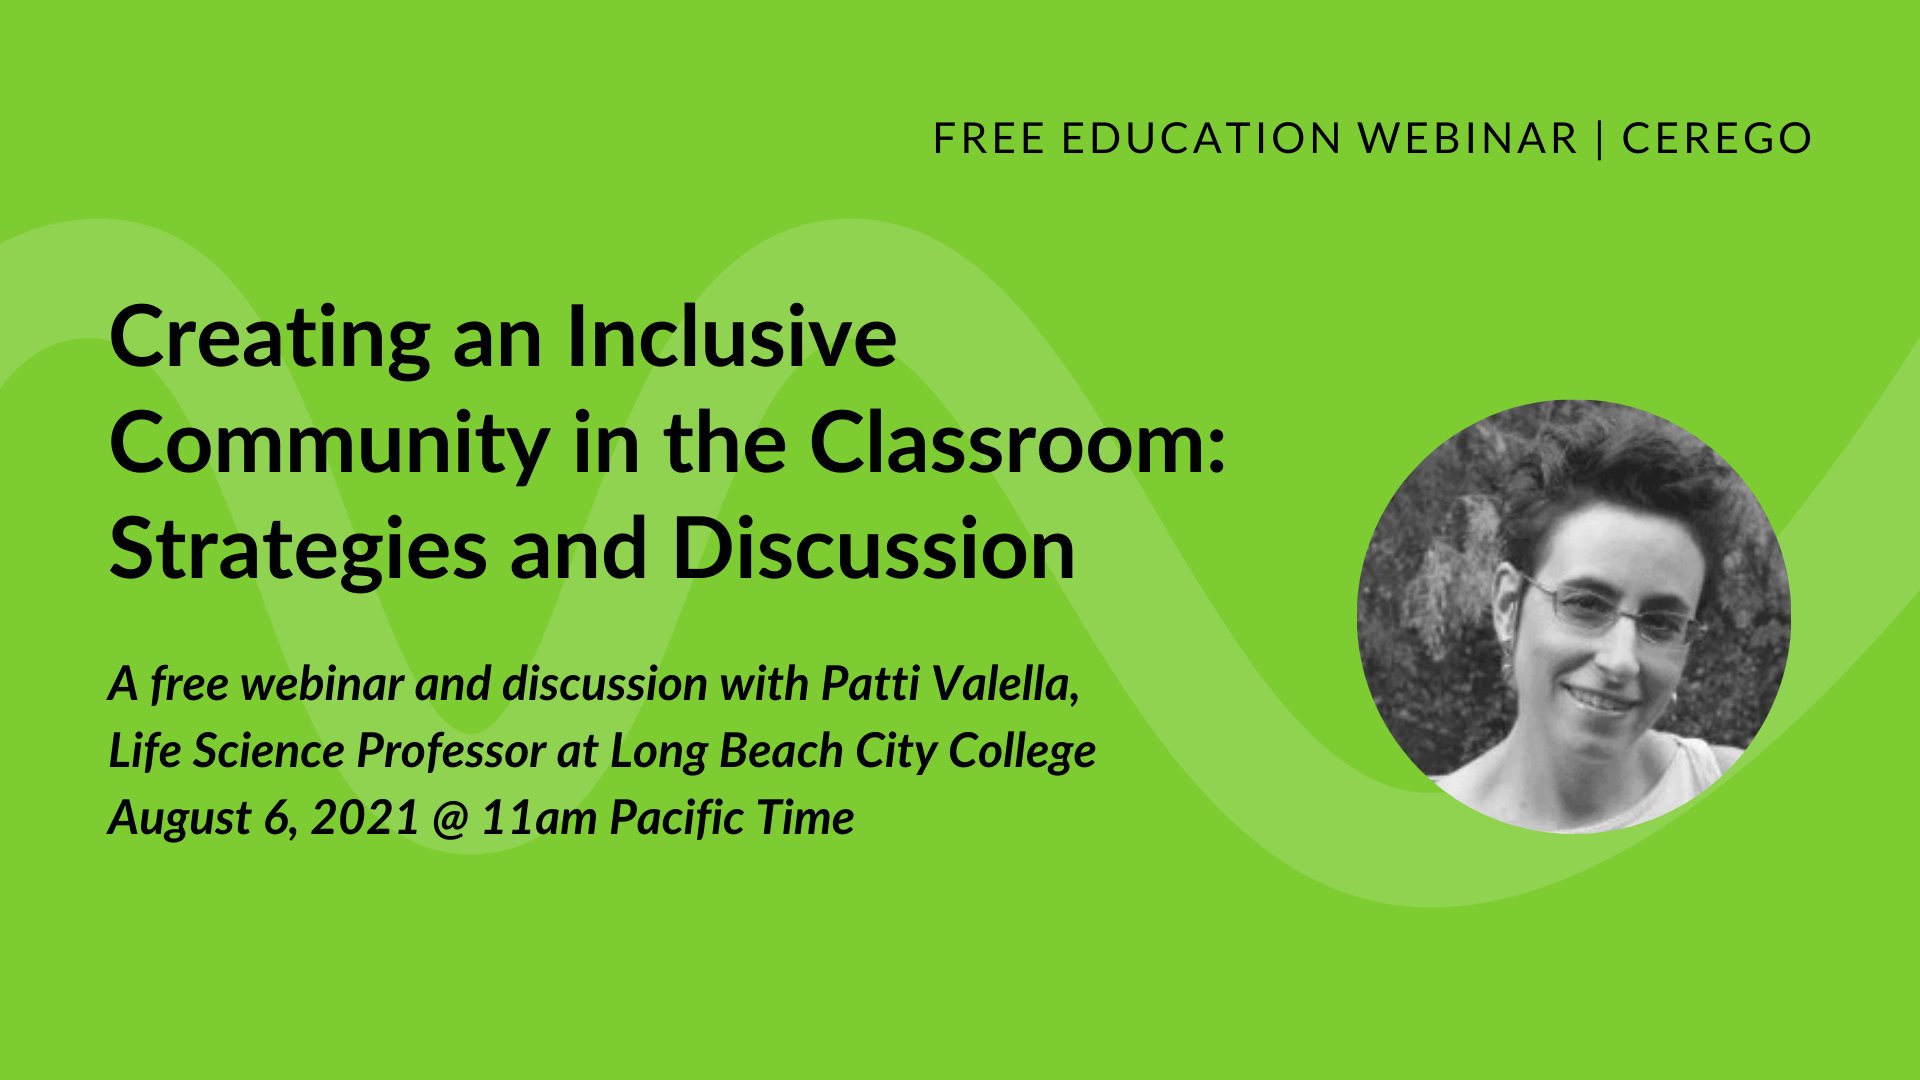 Creating an Inclusive Community in the Classroom